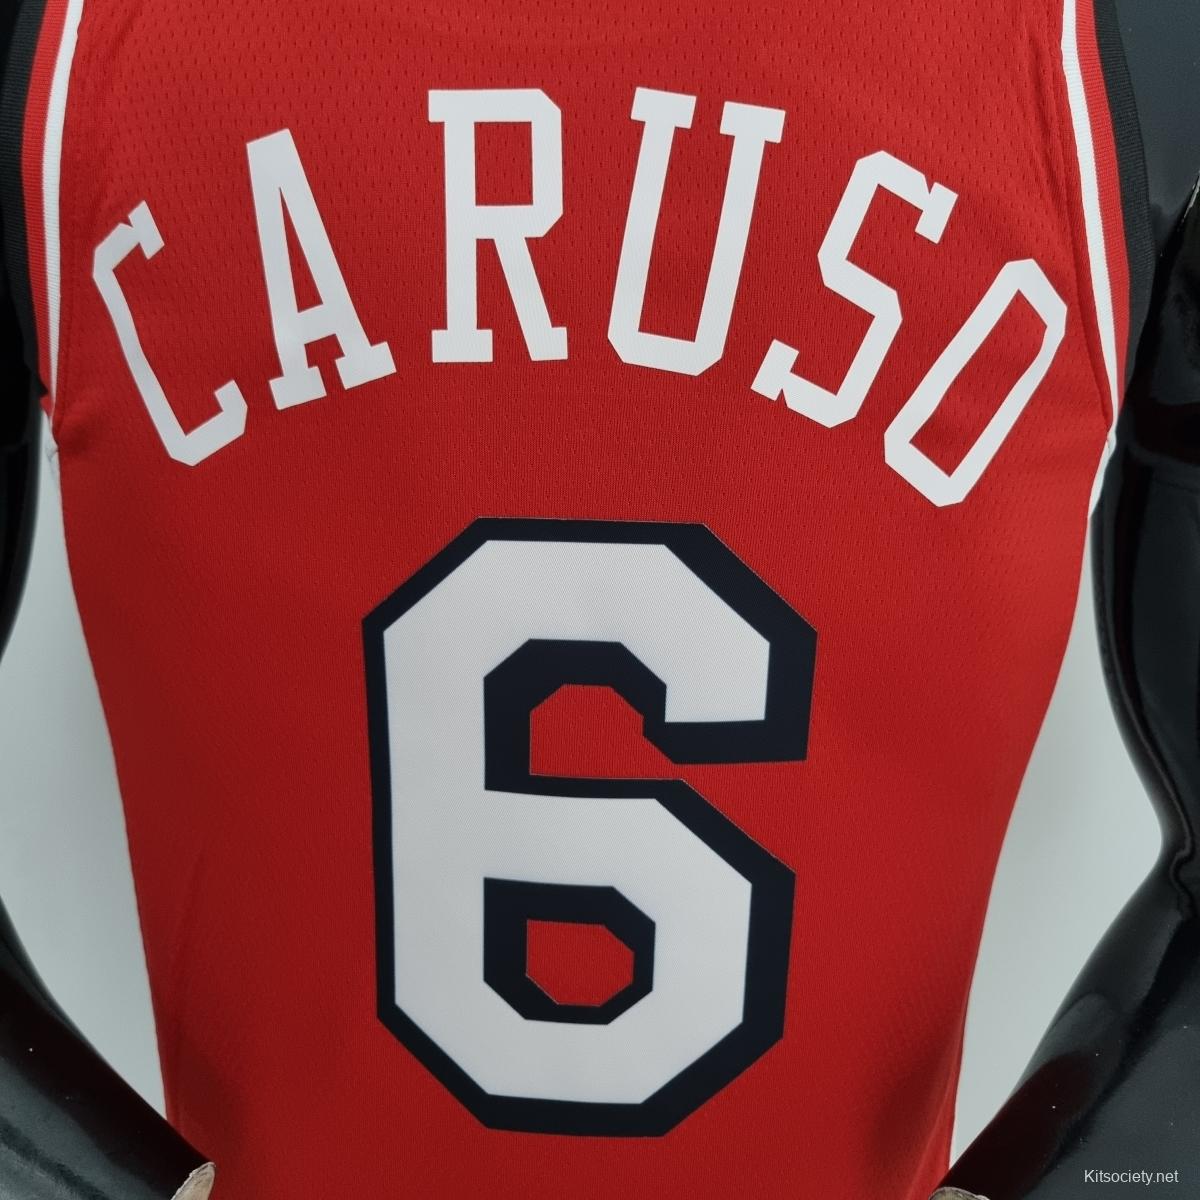 Custom Caruso Jersey - got to rock at the Bulls vs Knicks game